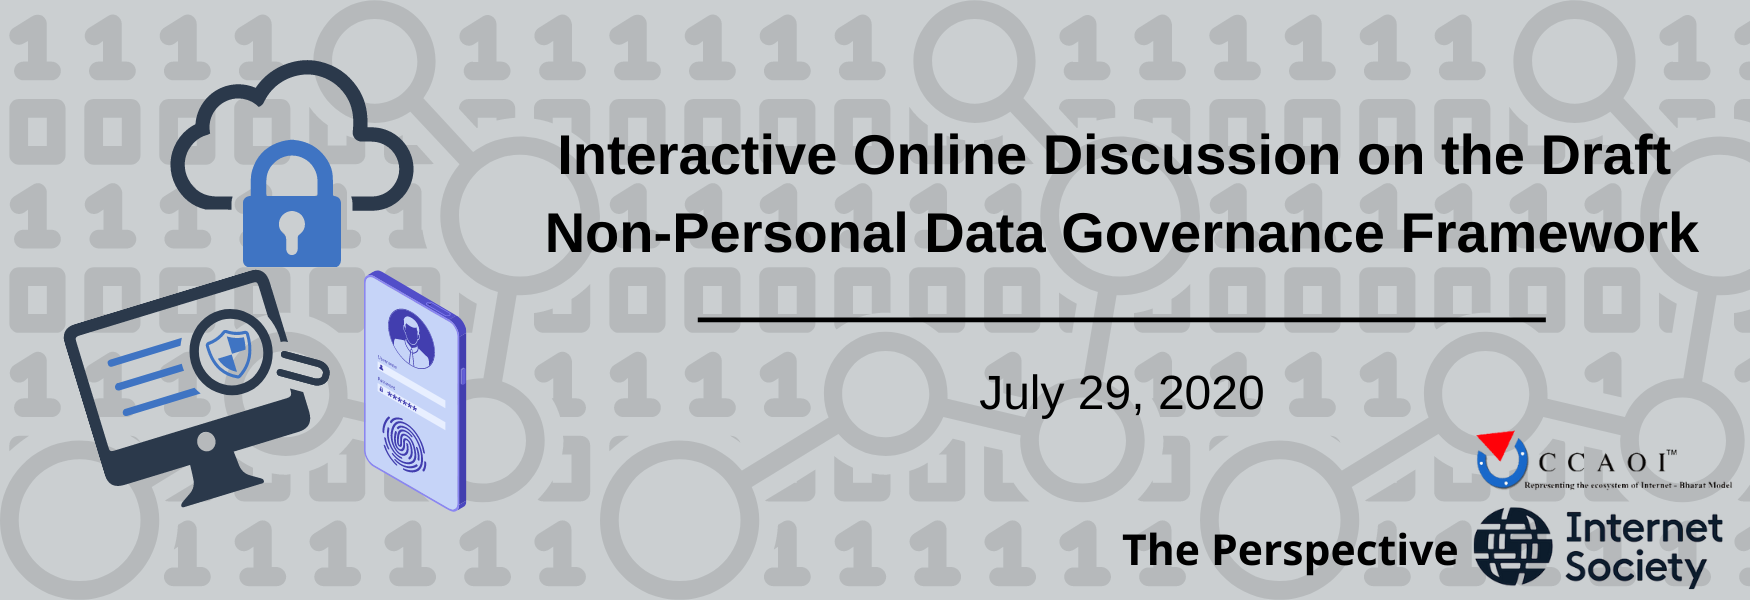 Interactive Online Discussion on the Draft Non-Personal Data Governance Framework